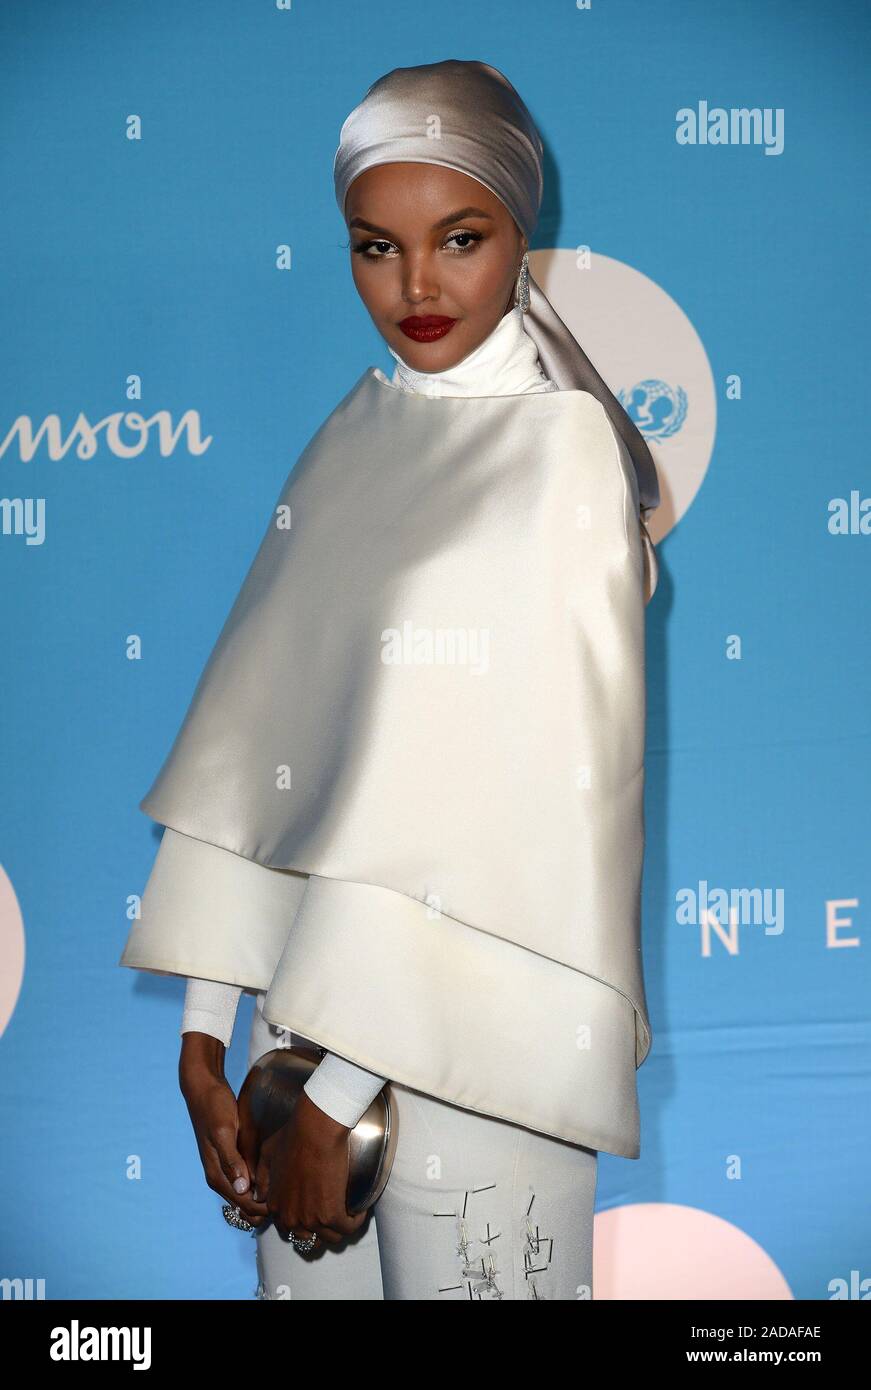 New York, NY, USA. 3rd Dec, 2019. Halima Aden at arrivals for 15th Annual UNICEF Snowflake Ball, The Atrium, New York, NY December 3, 2019. Credit: Kristin Callahan/Everett Collection/Alamy Live News Stock Photo